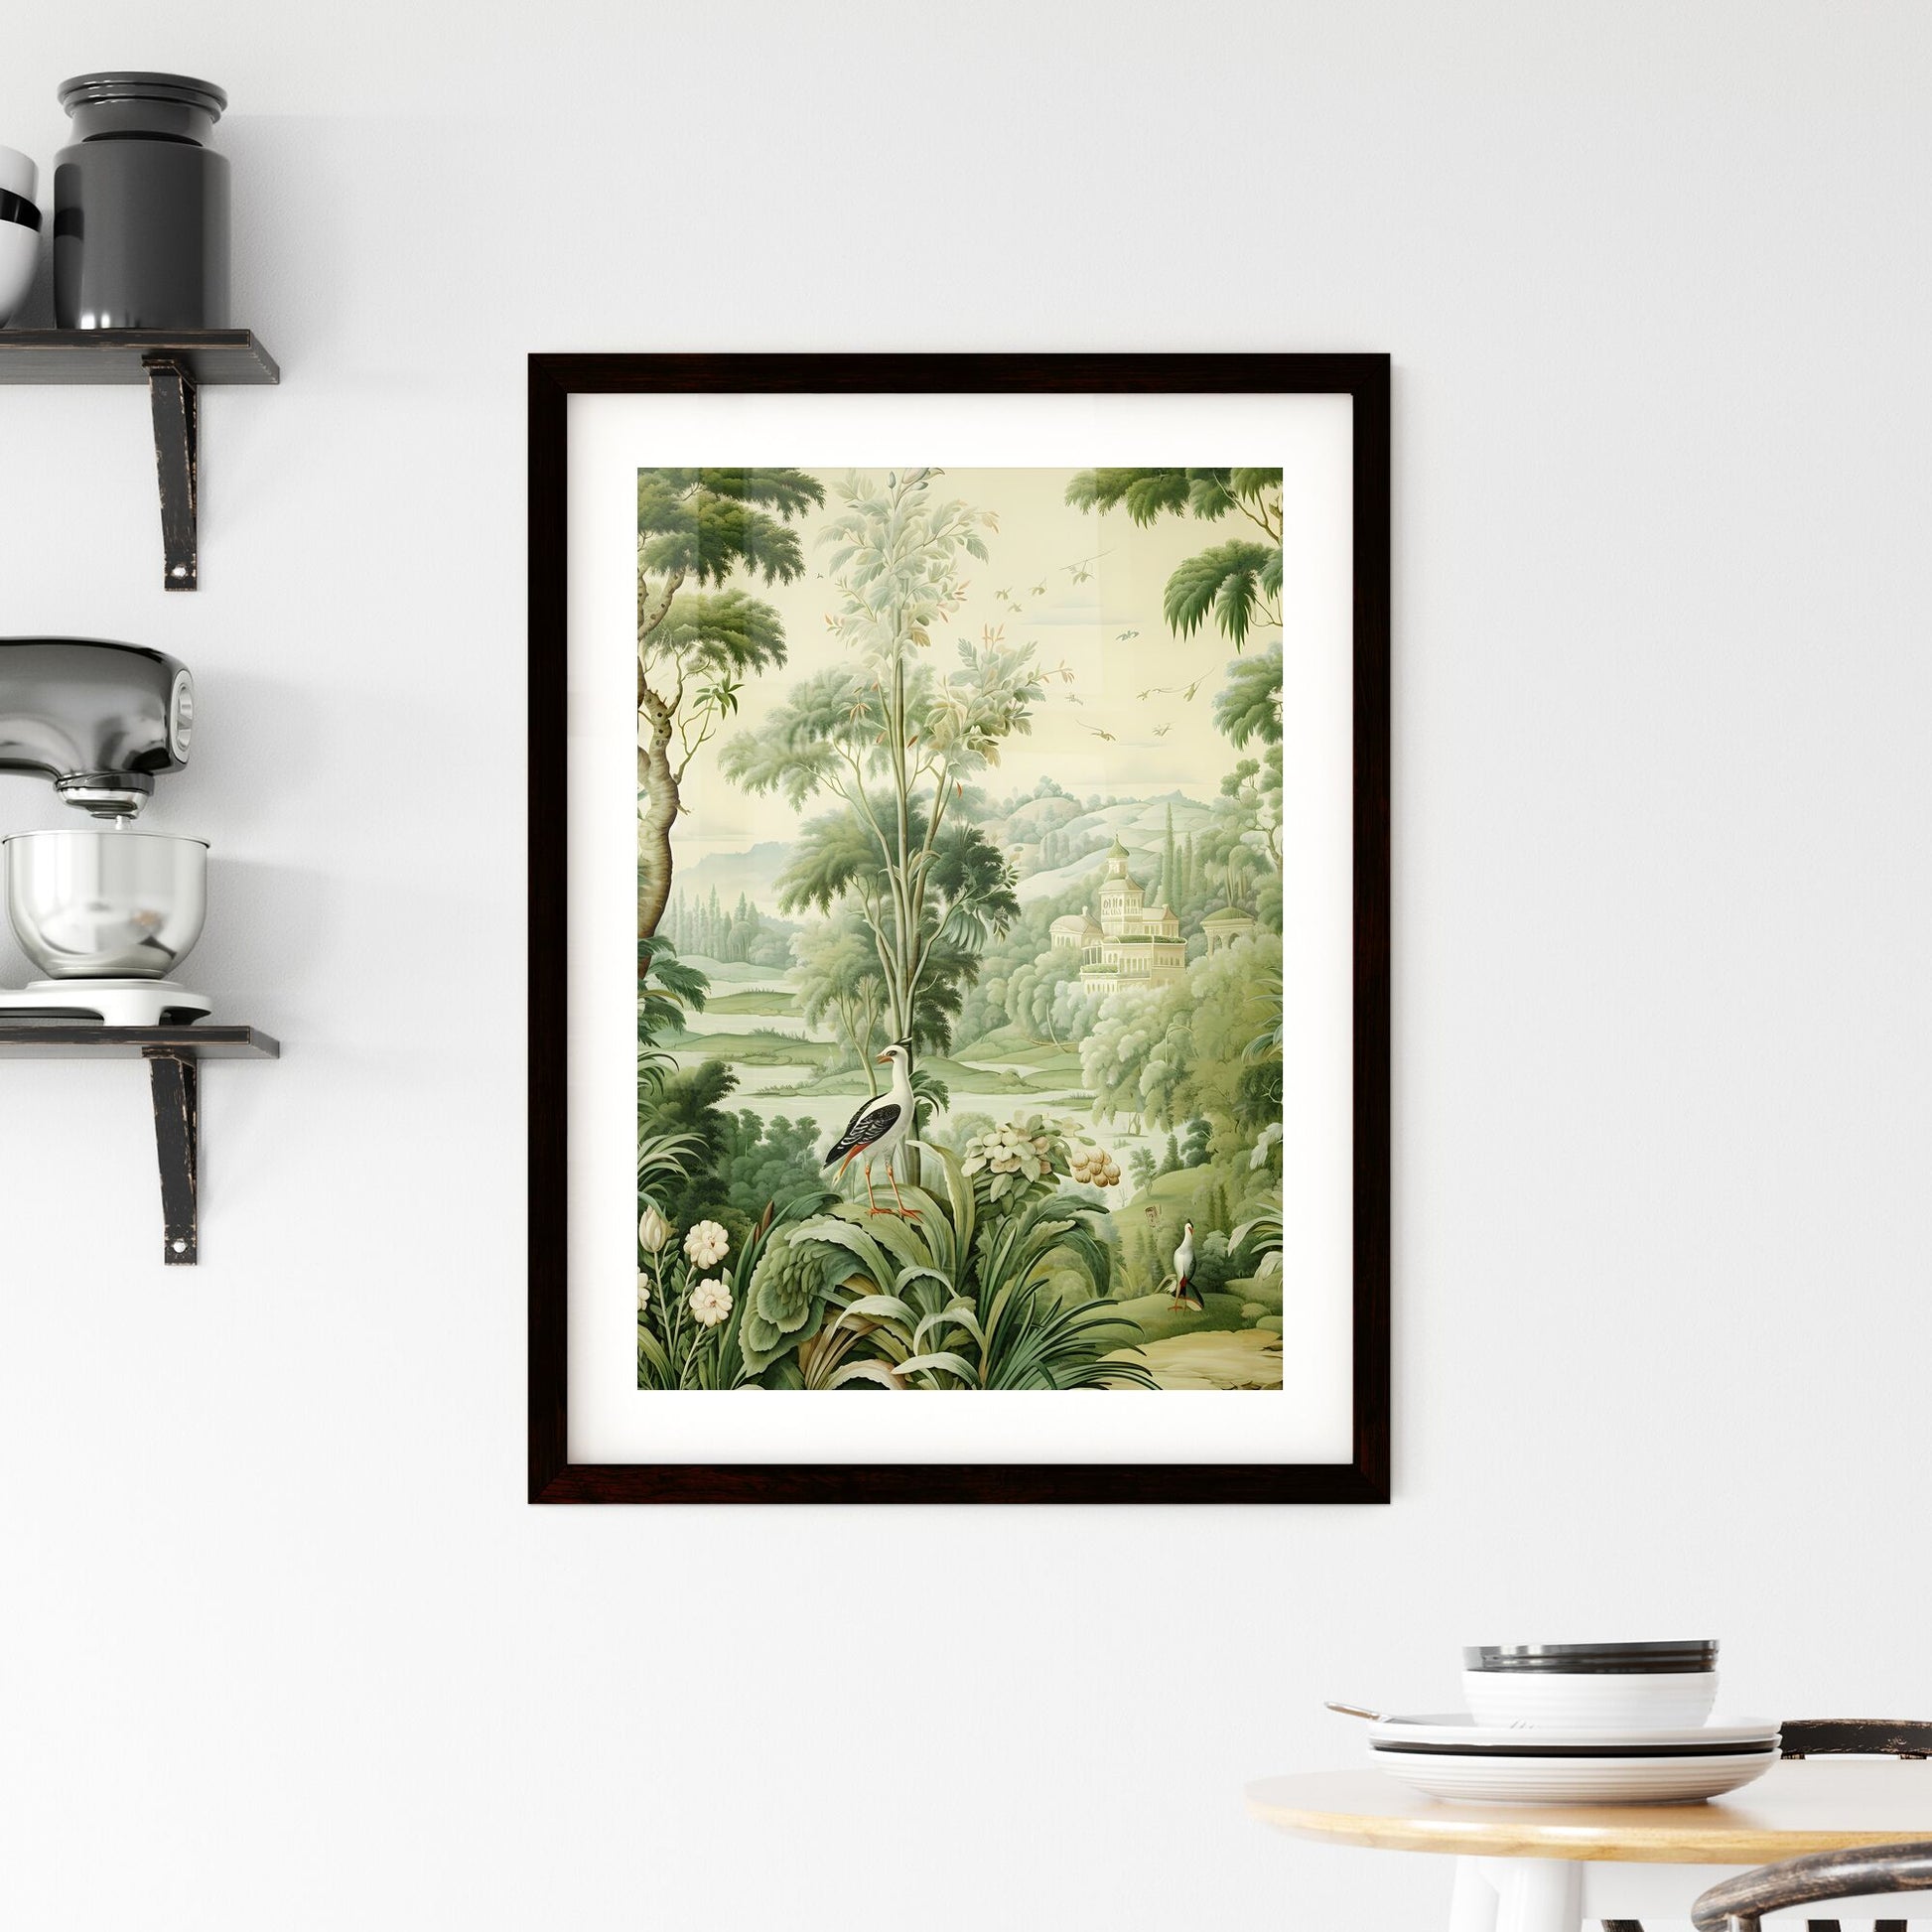 A Poster of green tapestry - A Painting Of A Landscape With Trees And Birds Default Title